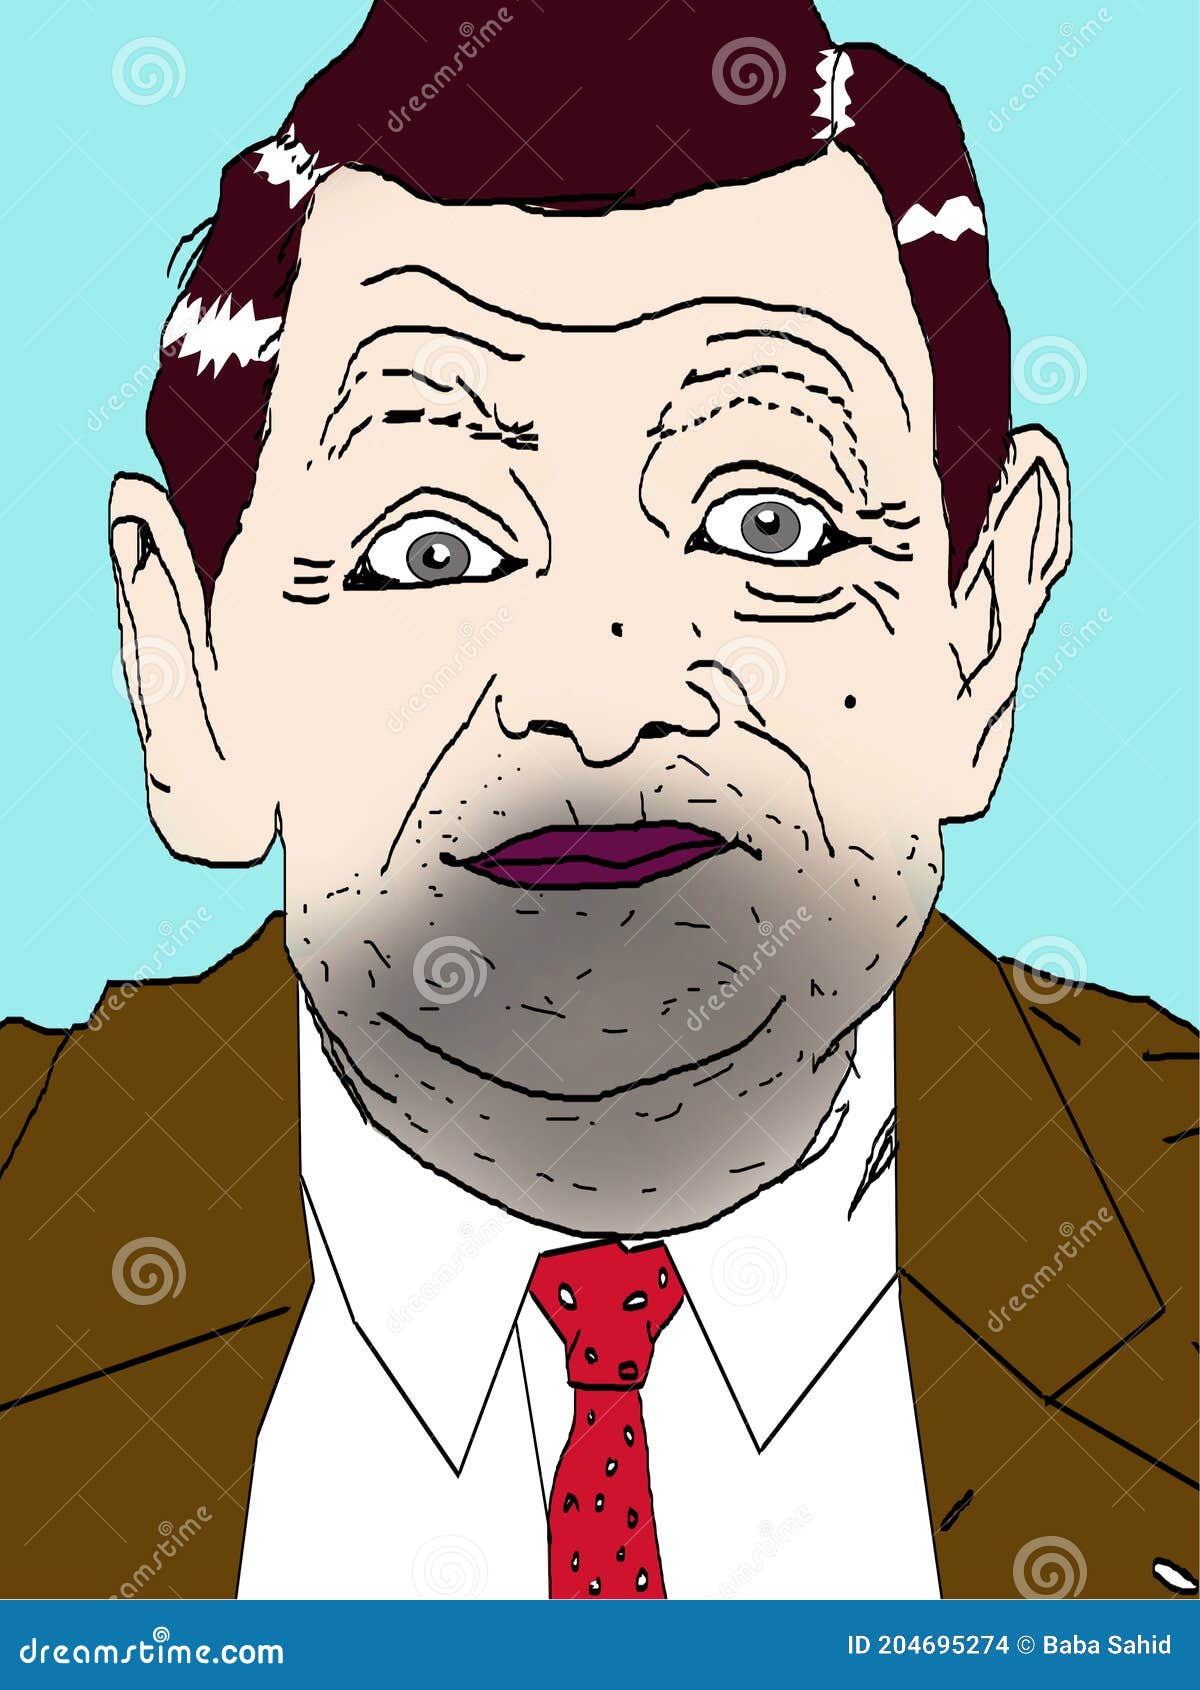 How to draw Mr Bean  YouTube